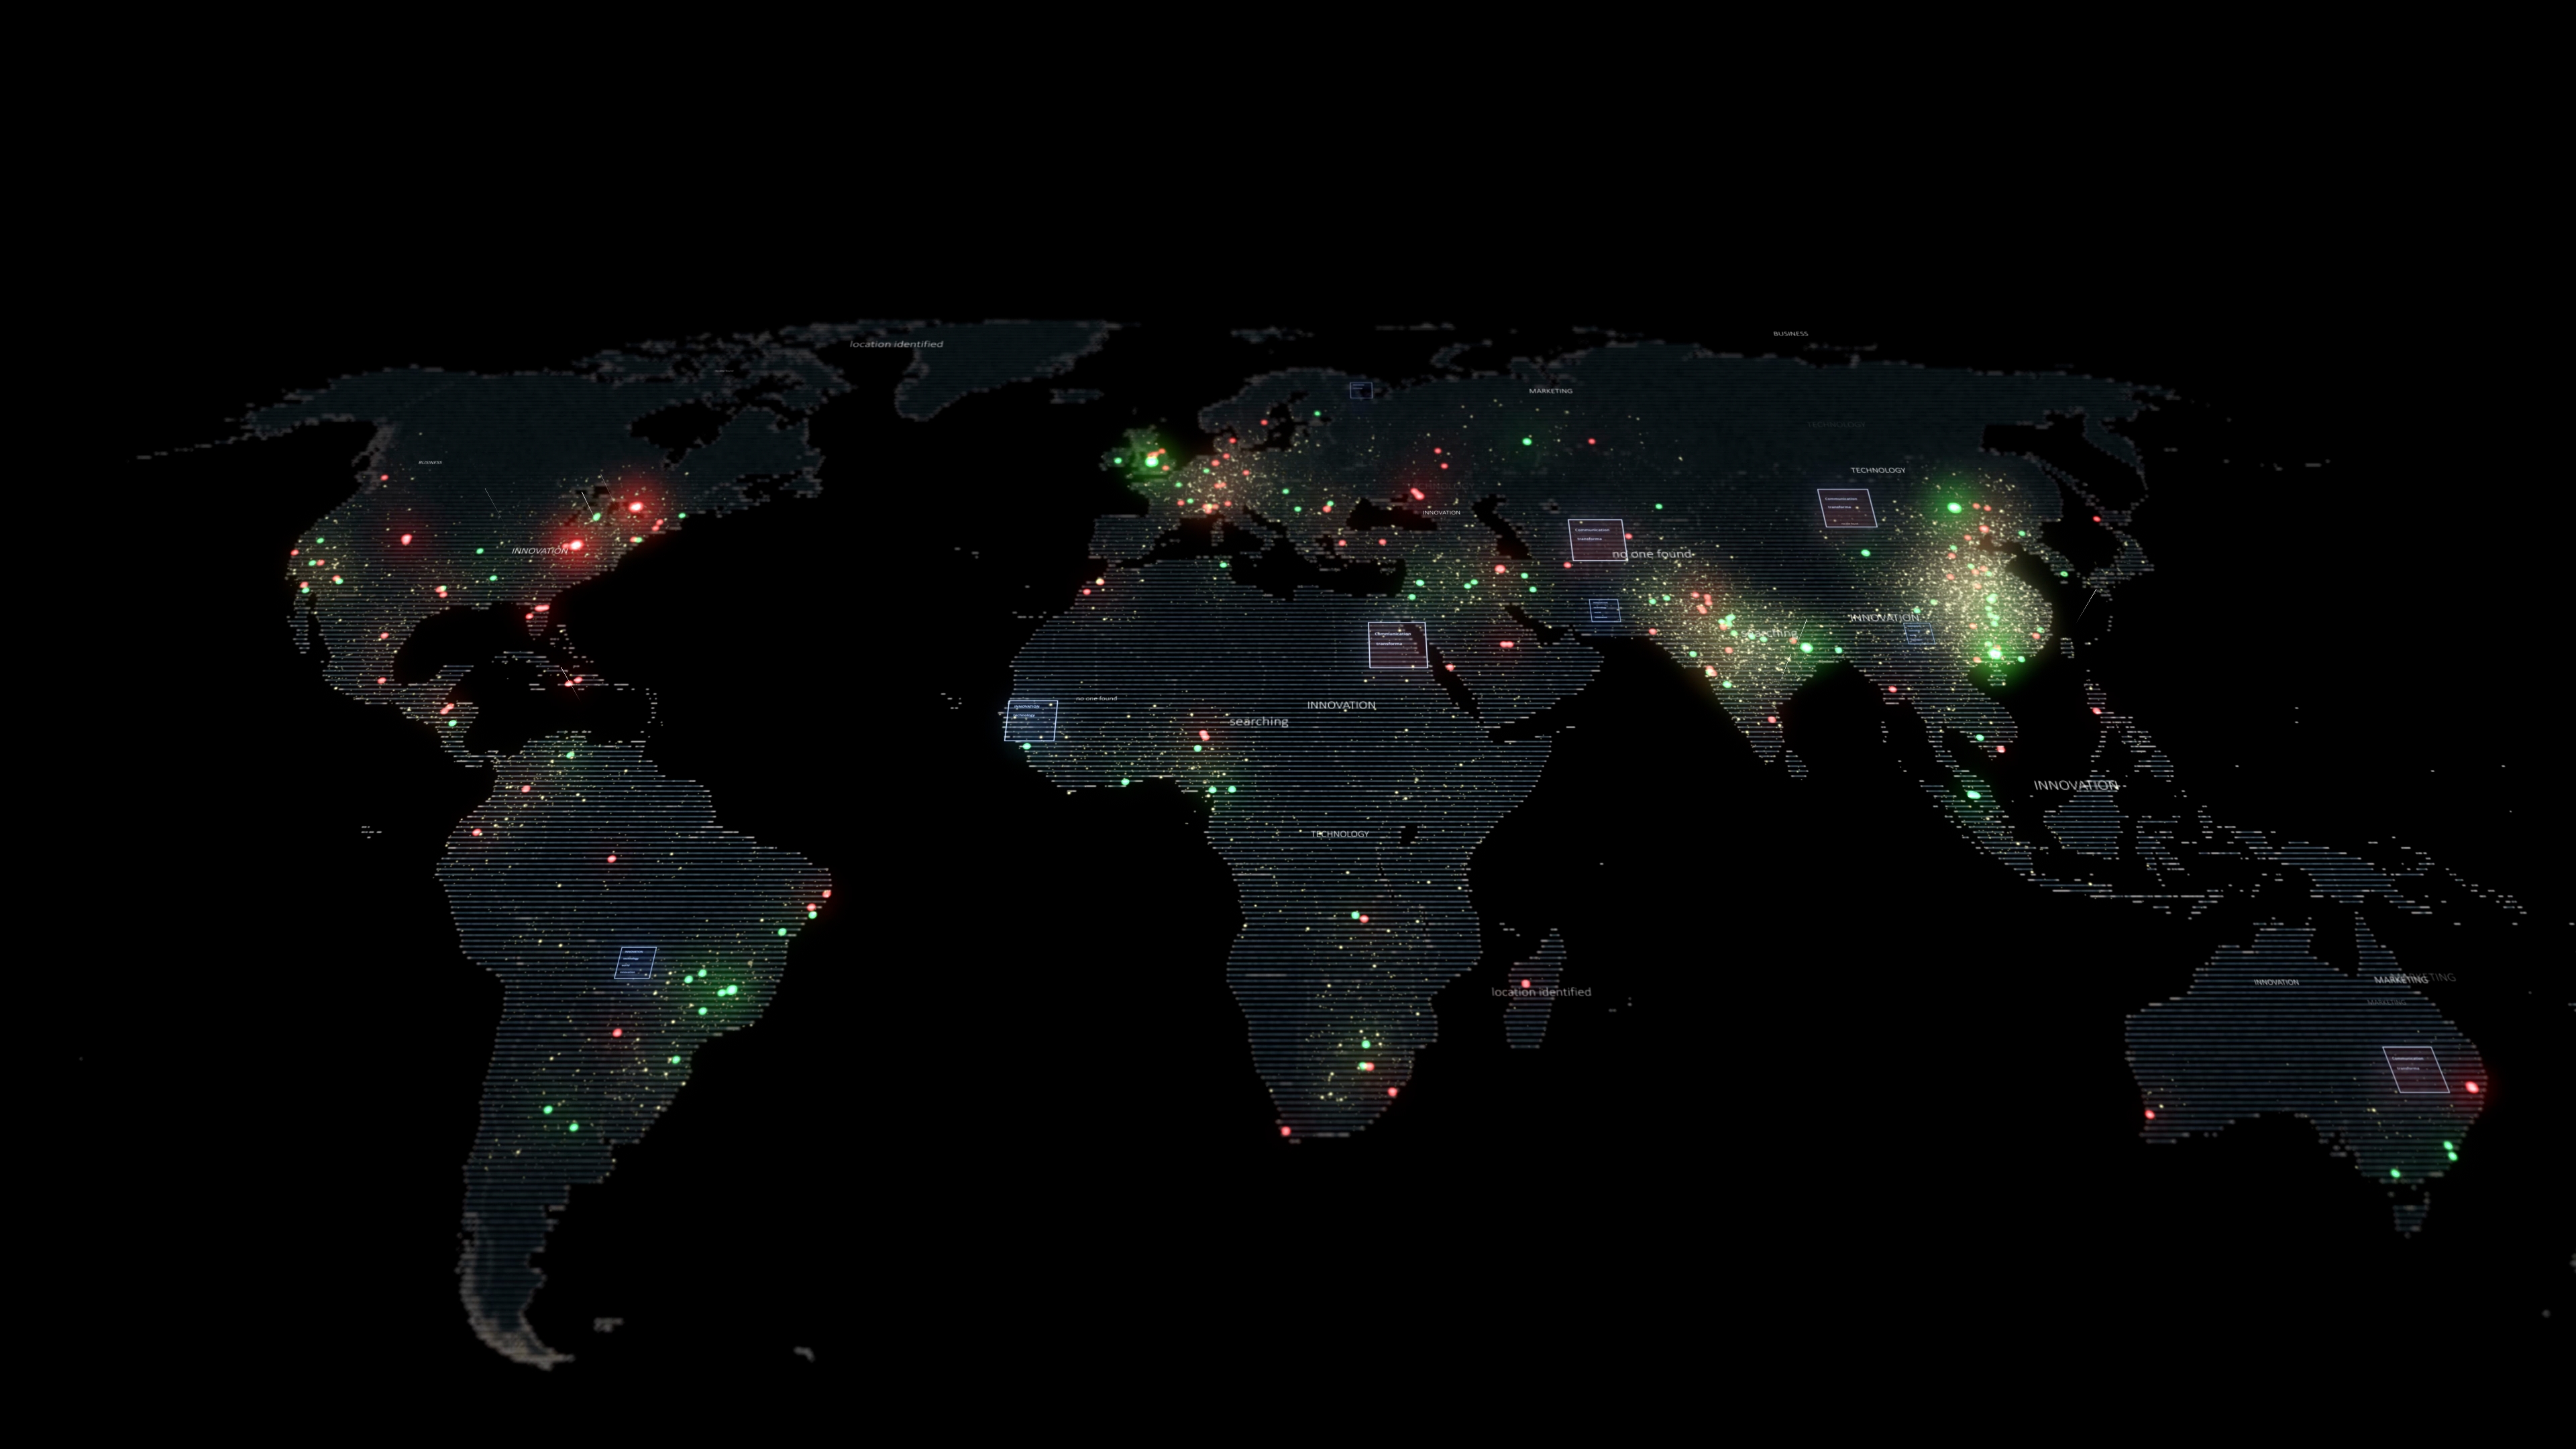 A world map with artificial lights to make it look more technical.